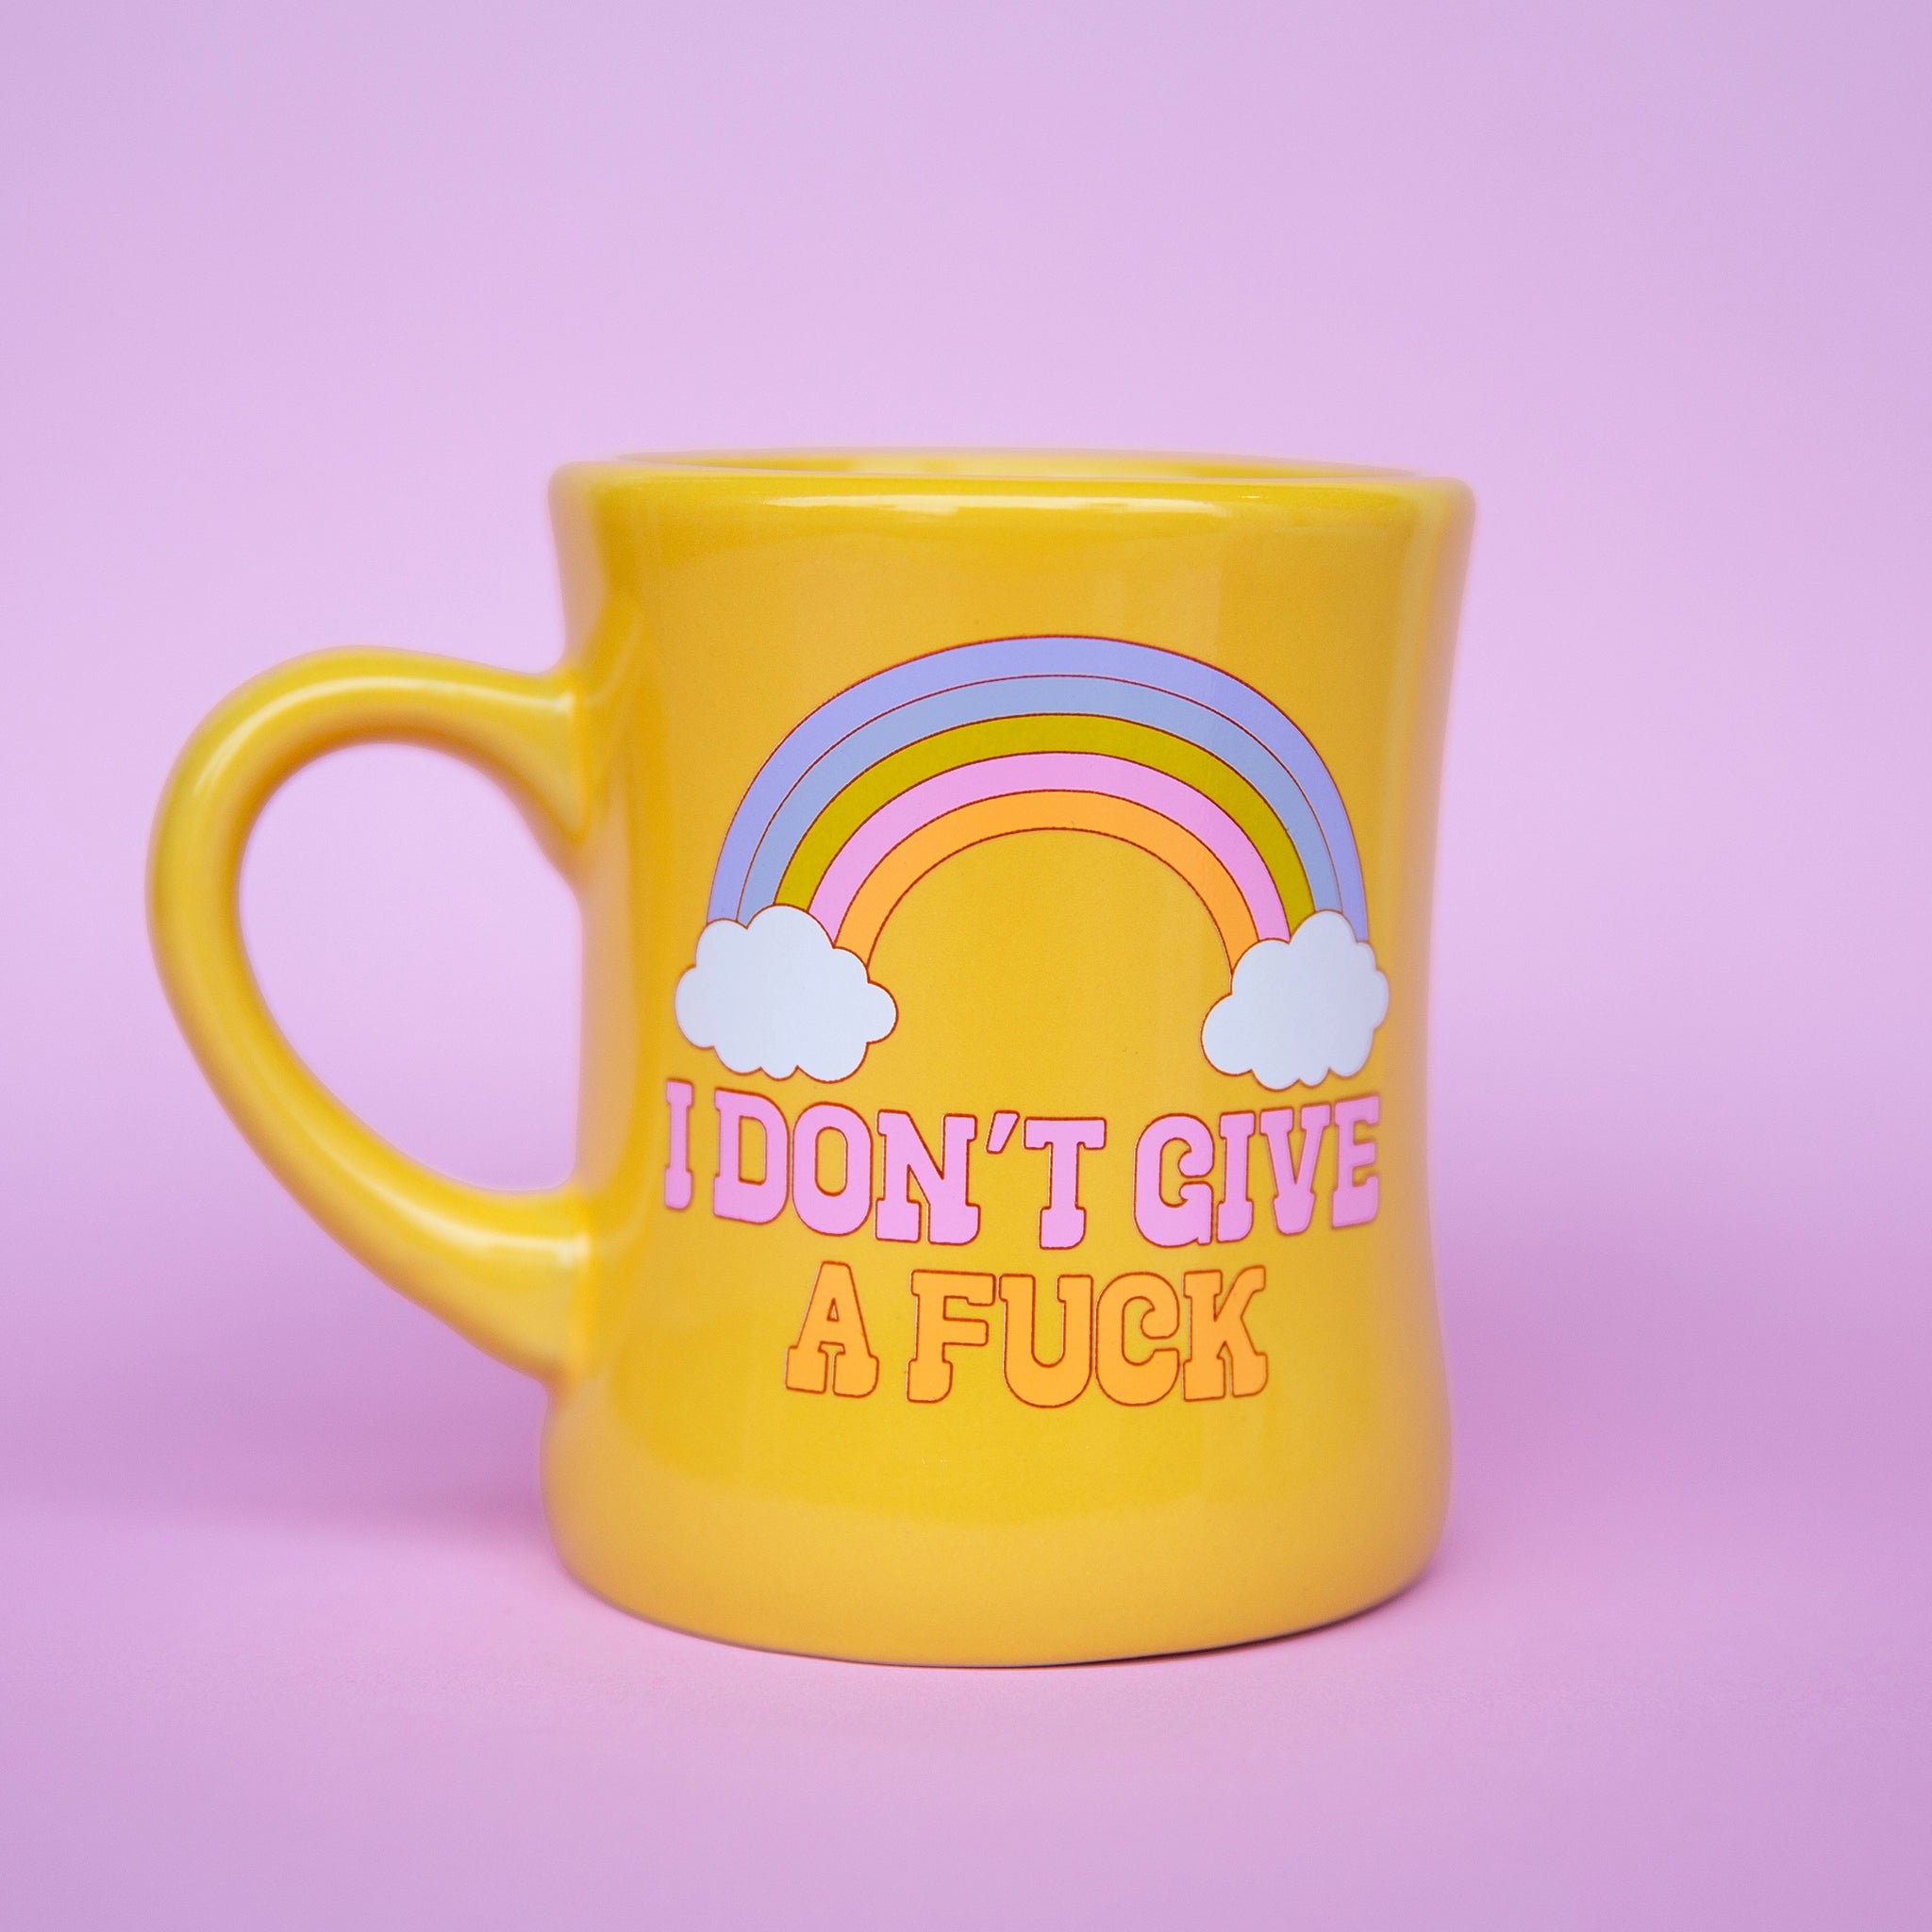 On a purple background is a yellow ceramic mug with a rainbow graphic as well as pink and orange text below it that reads, "I Don't Give A Fuck".